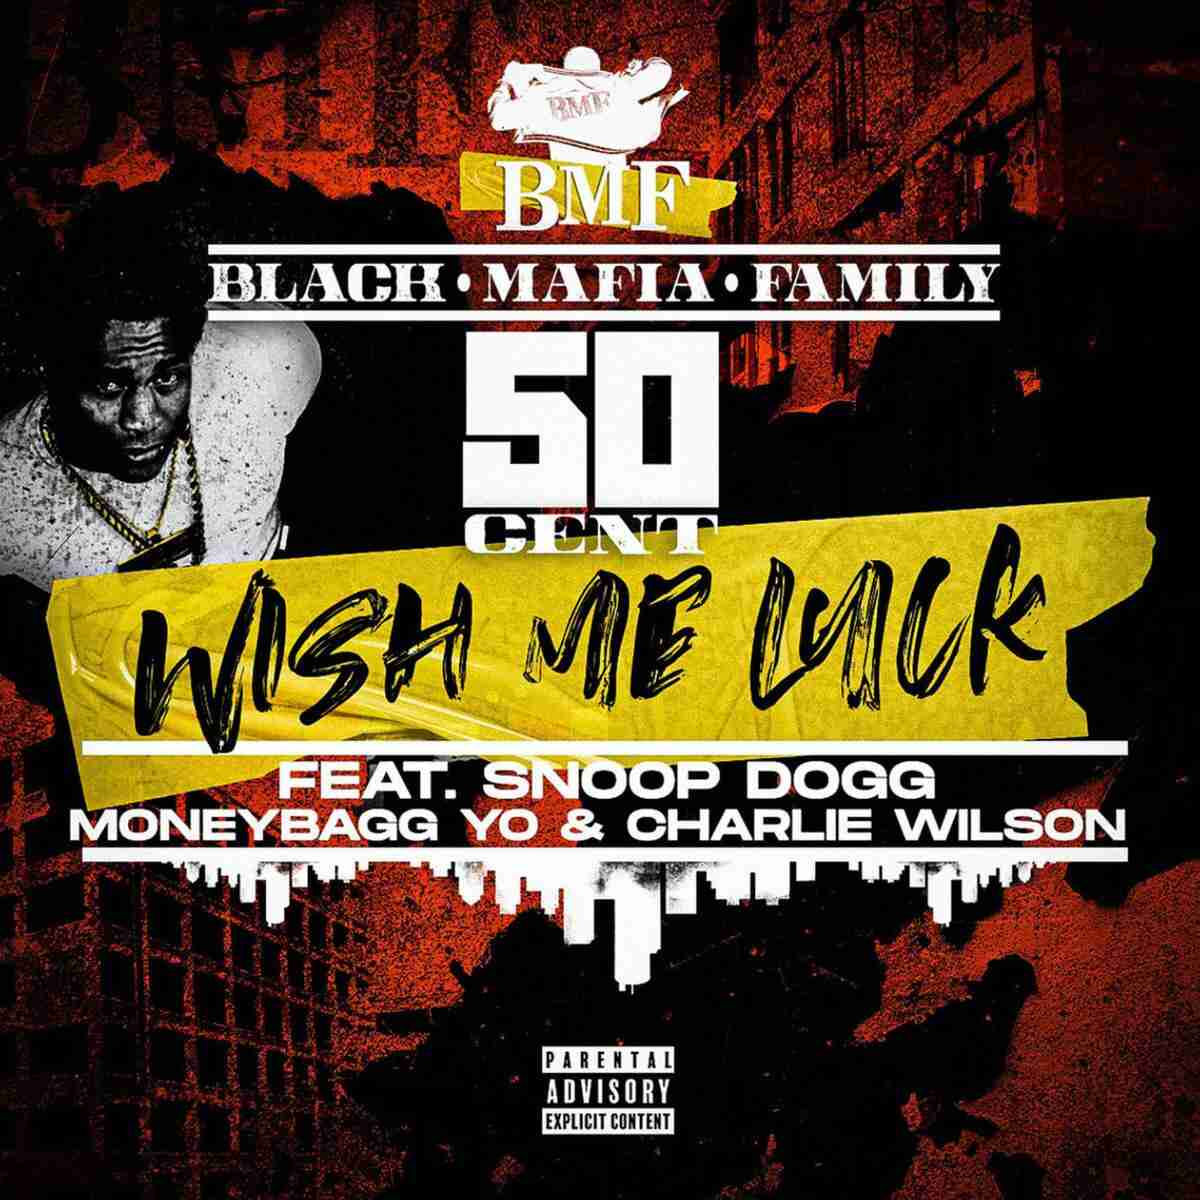 50 Cent - Wish Me Luck Ft. Snoop Dogg & MoneyBagg Yo